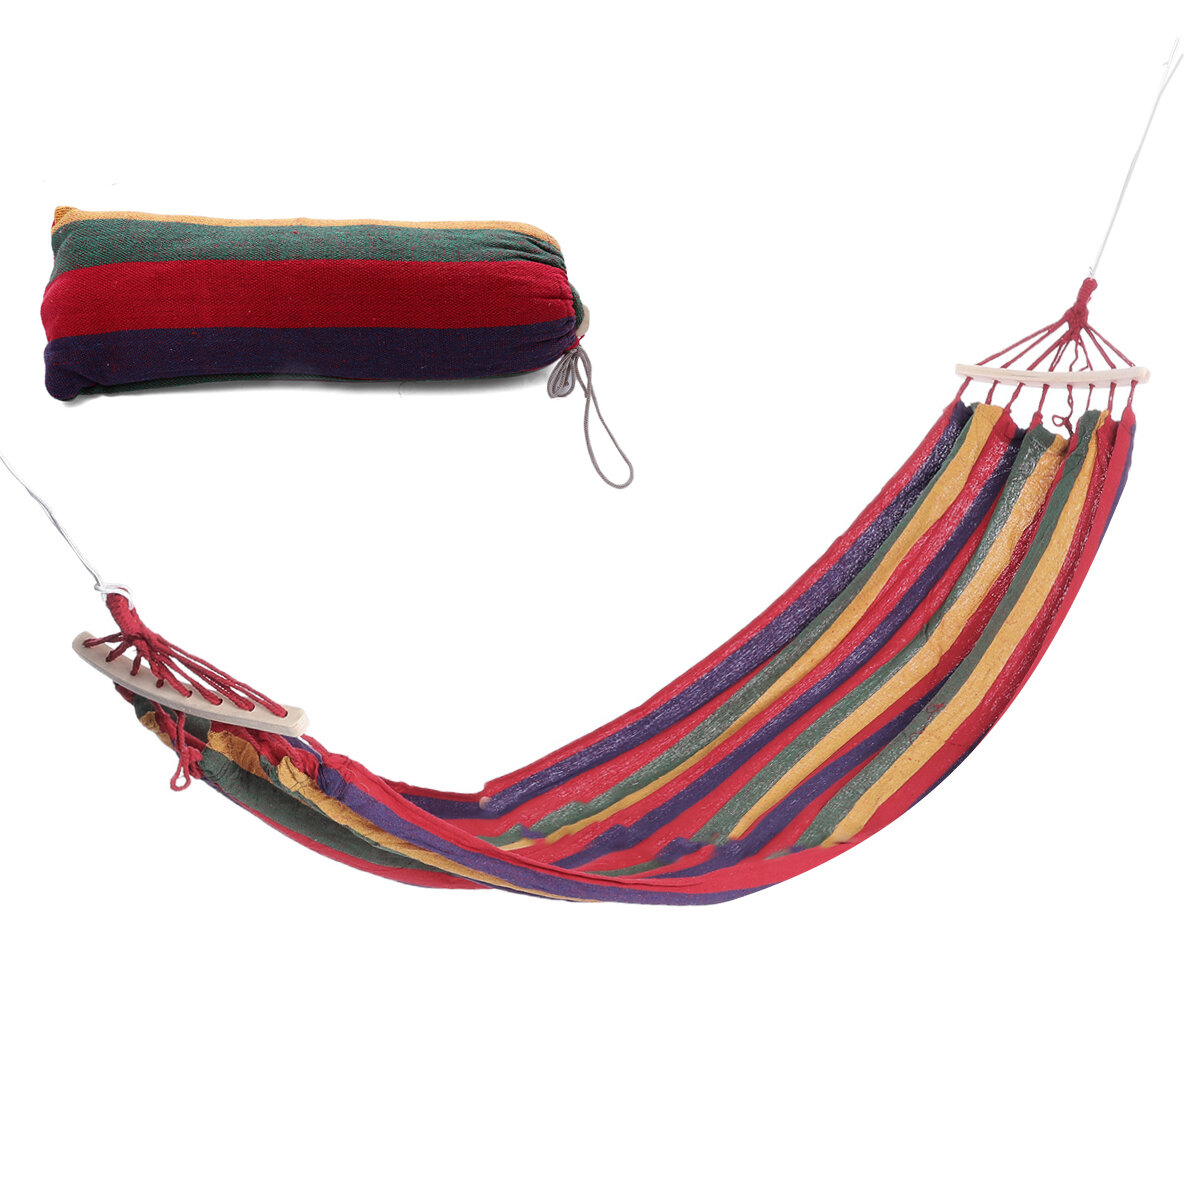 STRDC001 Ultralight Camping Hammock with Storage Bag Portable Rainbow Canvas Outdoor Activities Swing